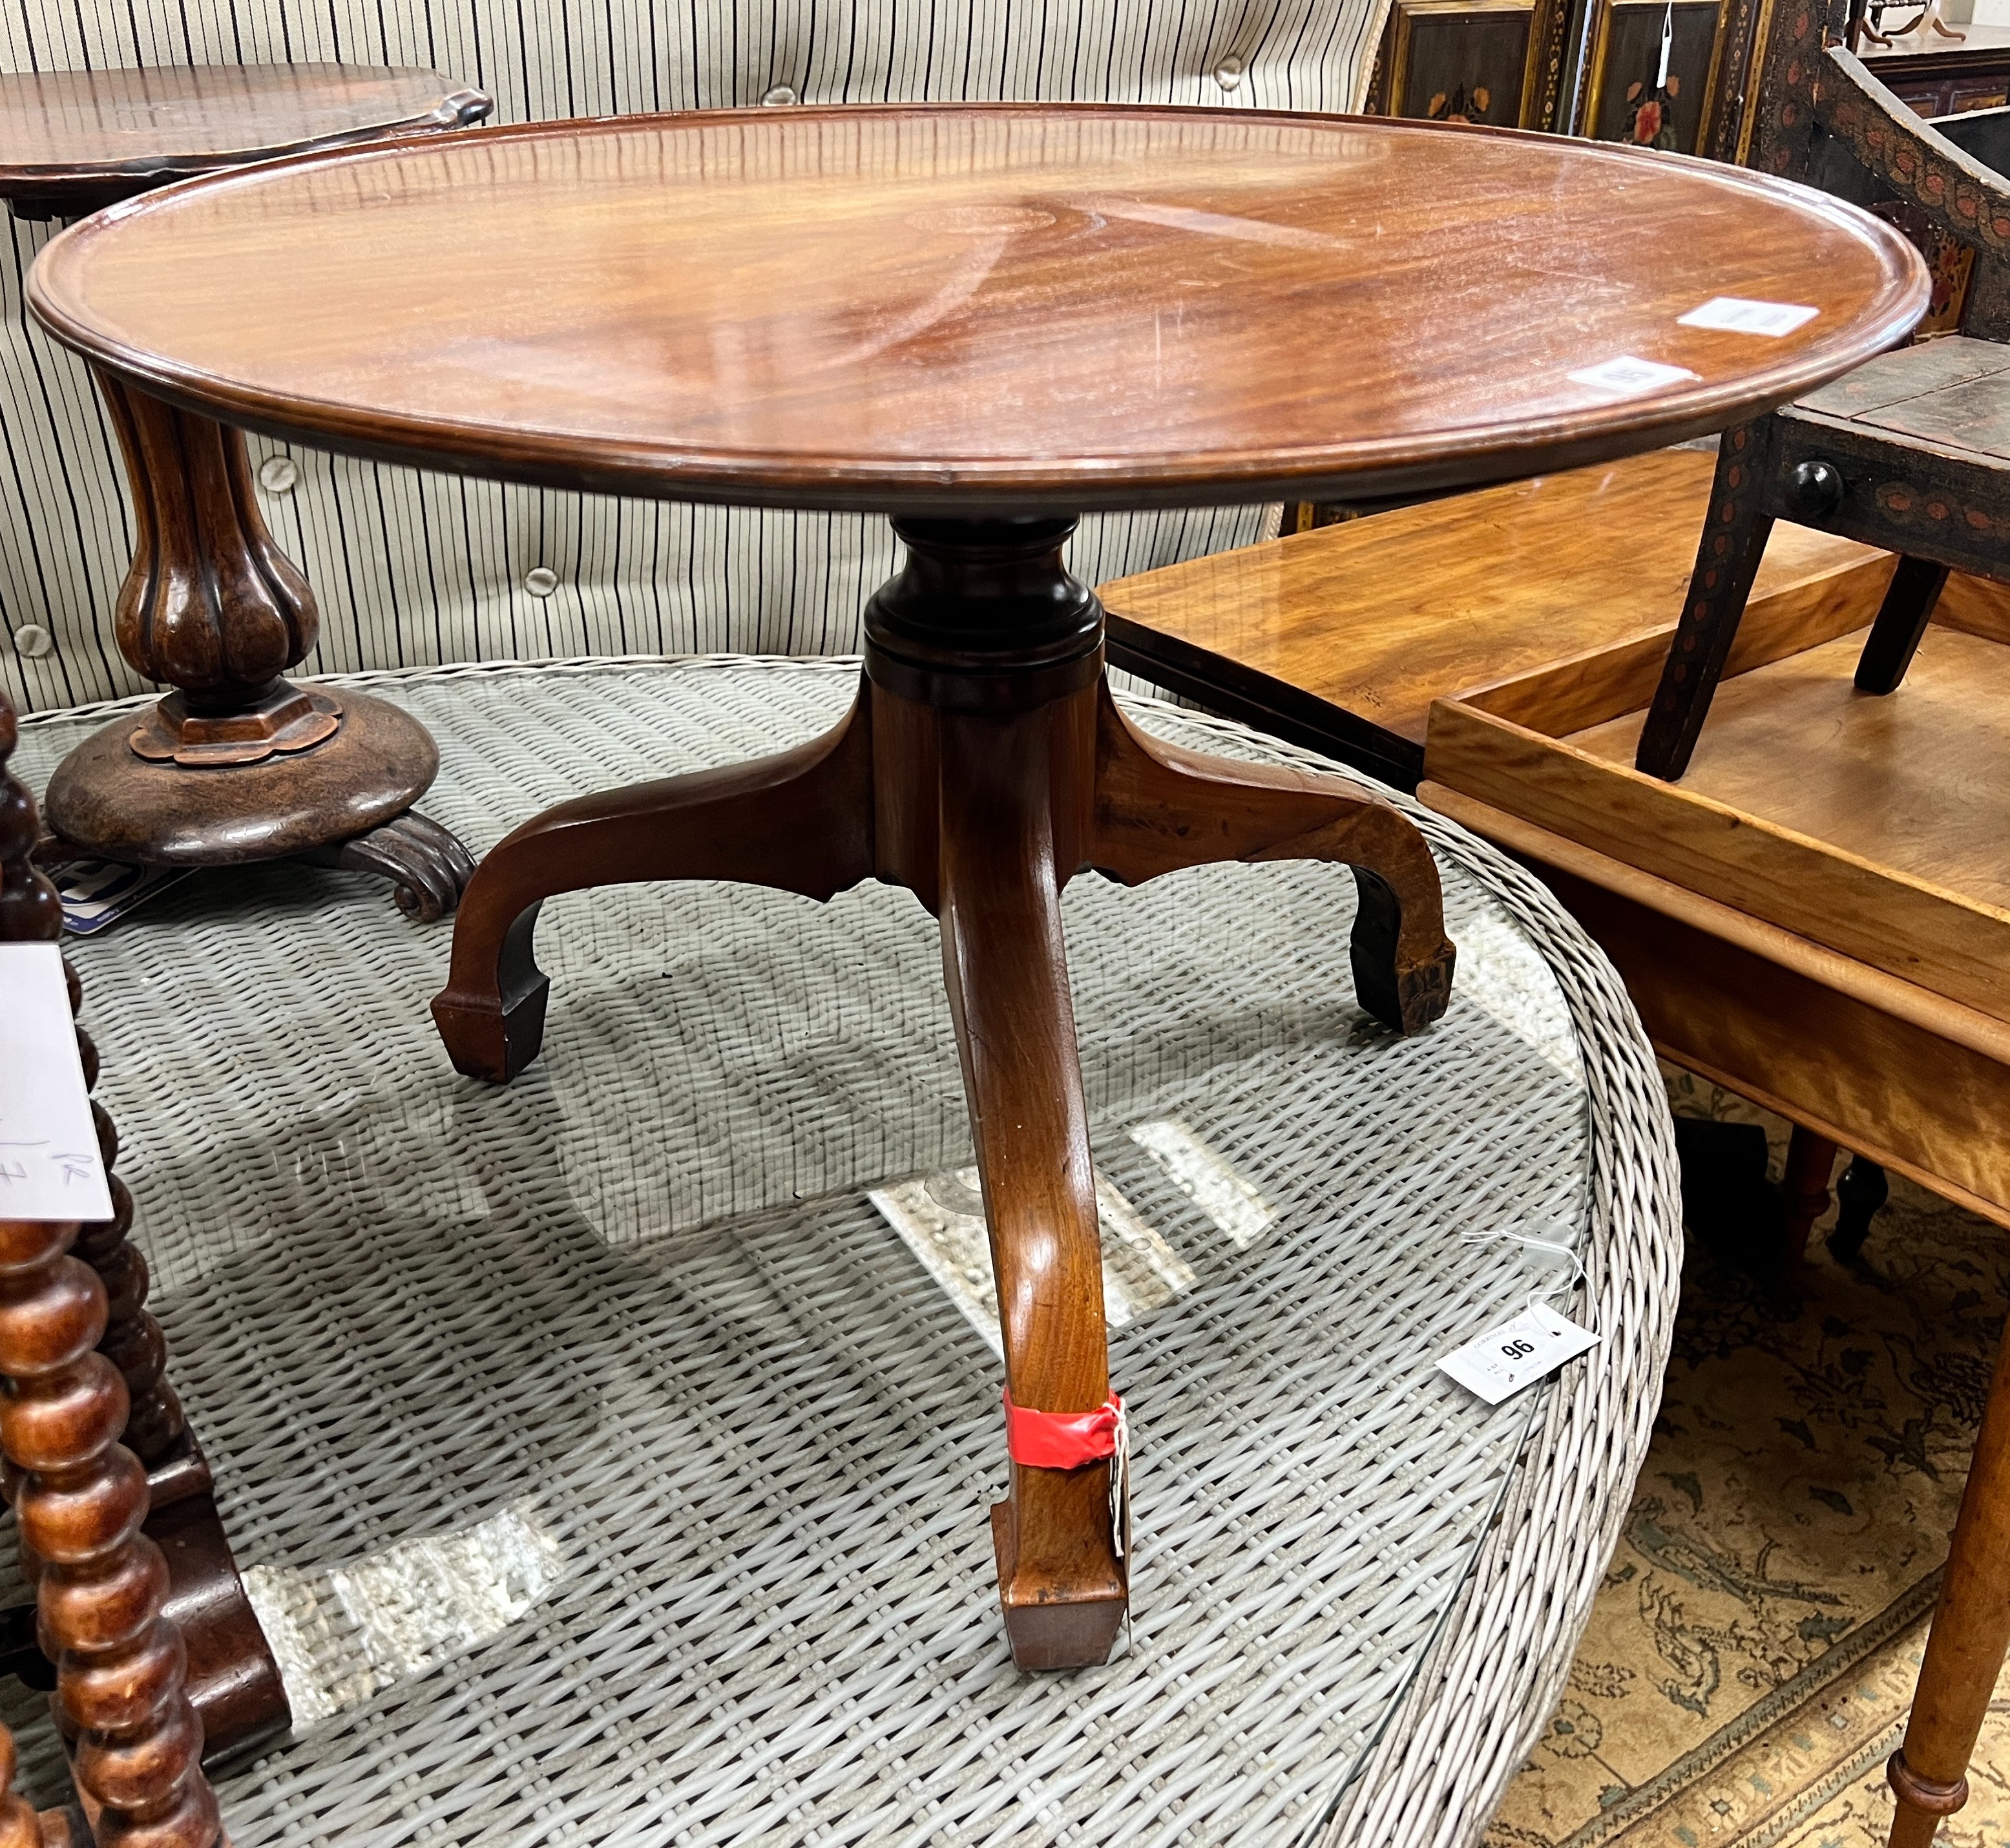 An early Victorian mahogany dish top tea table, diameter 69cm, height 47cm (cut down, converted from a dumb waiter) and a Victorian Sutherland table, width 55cm, depth 16cm, height 63cm